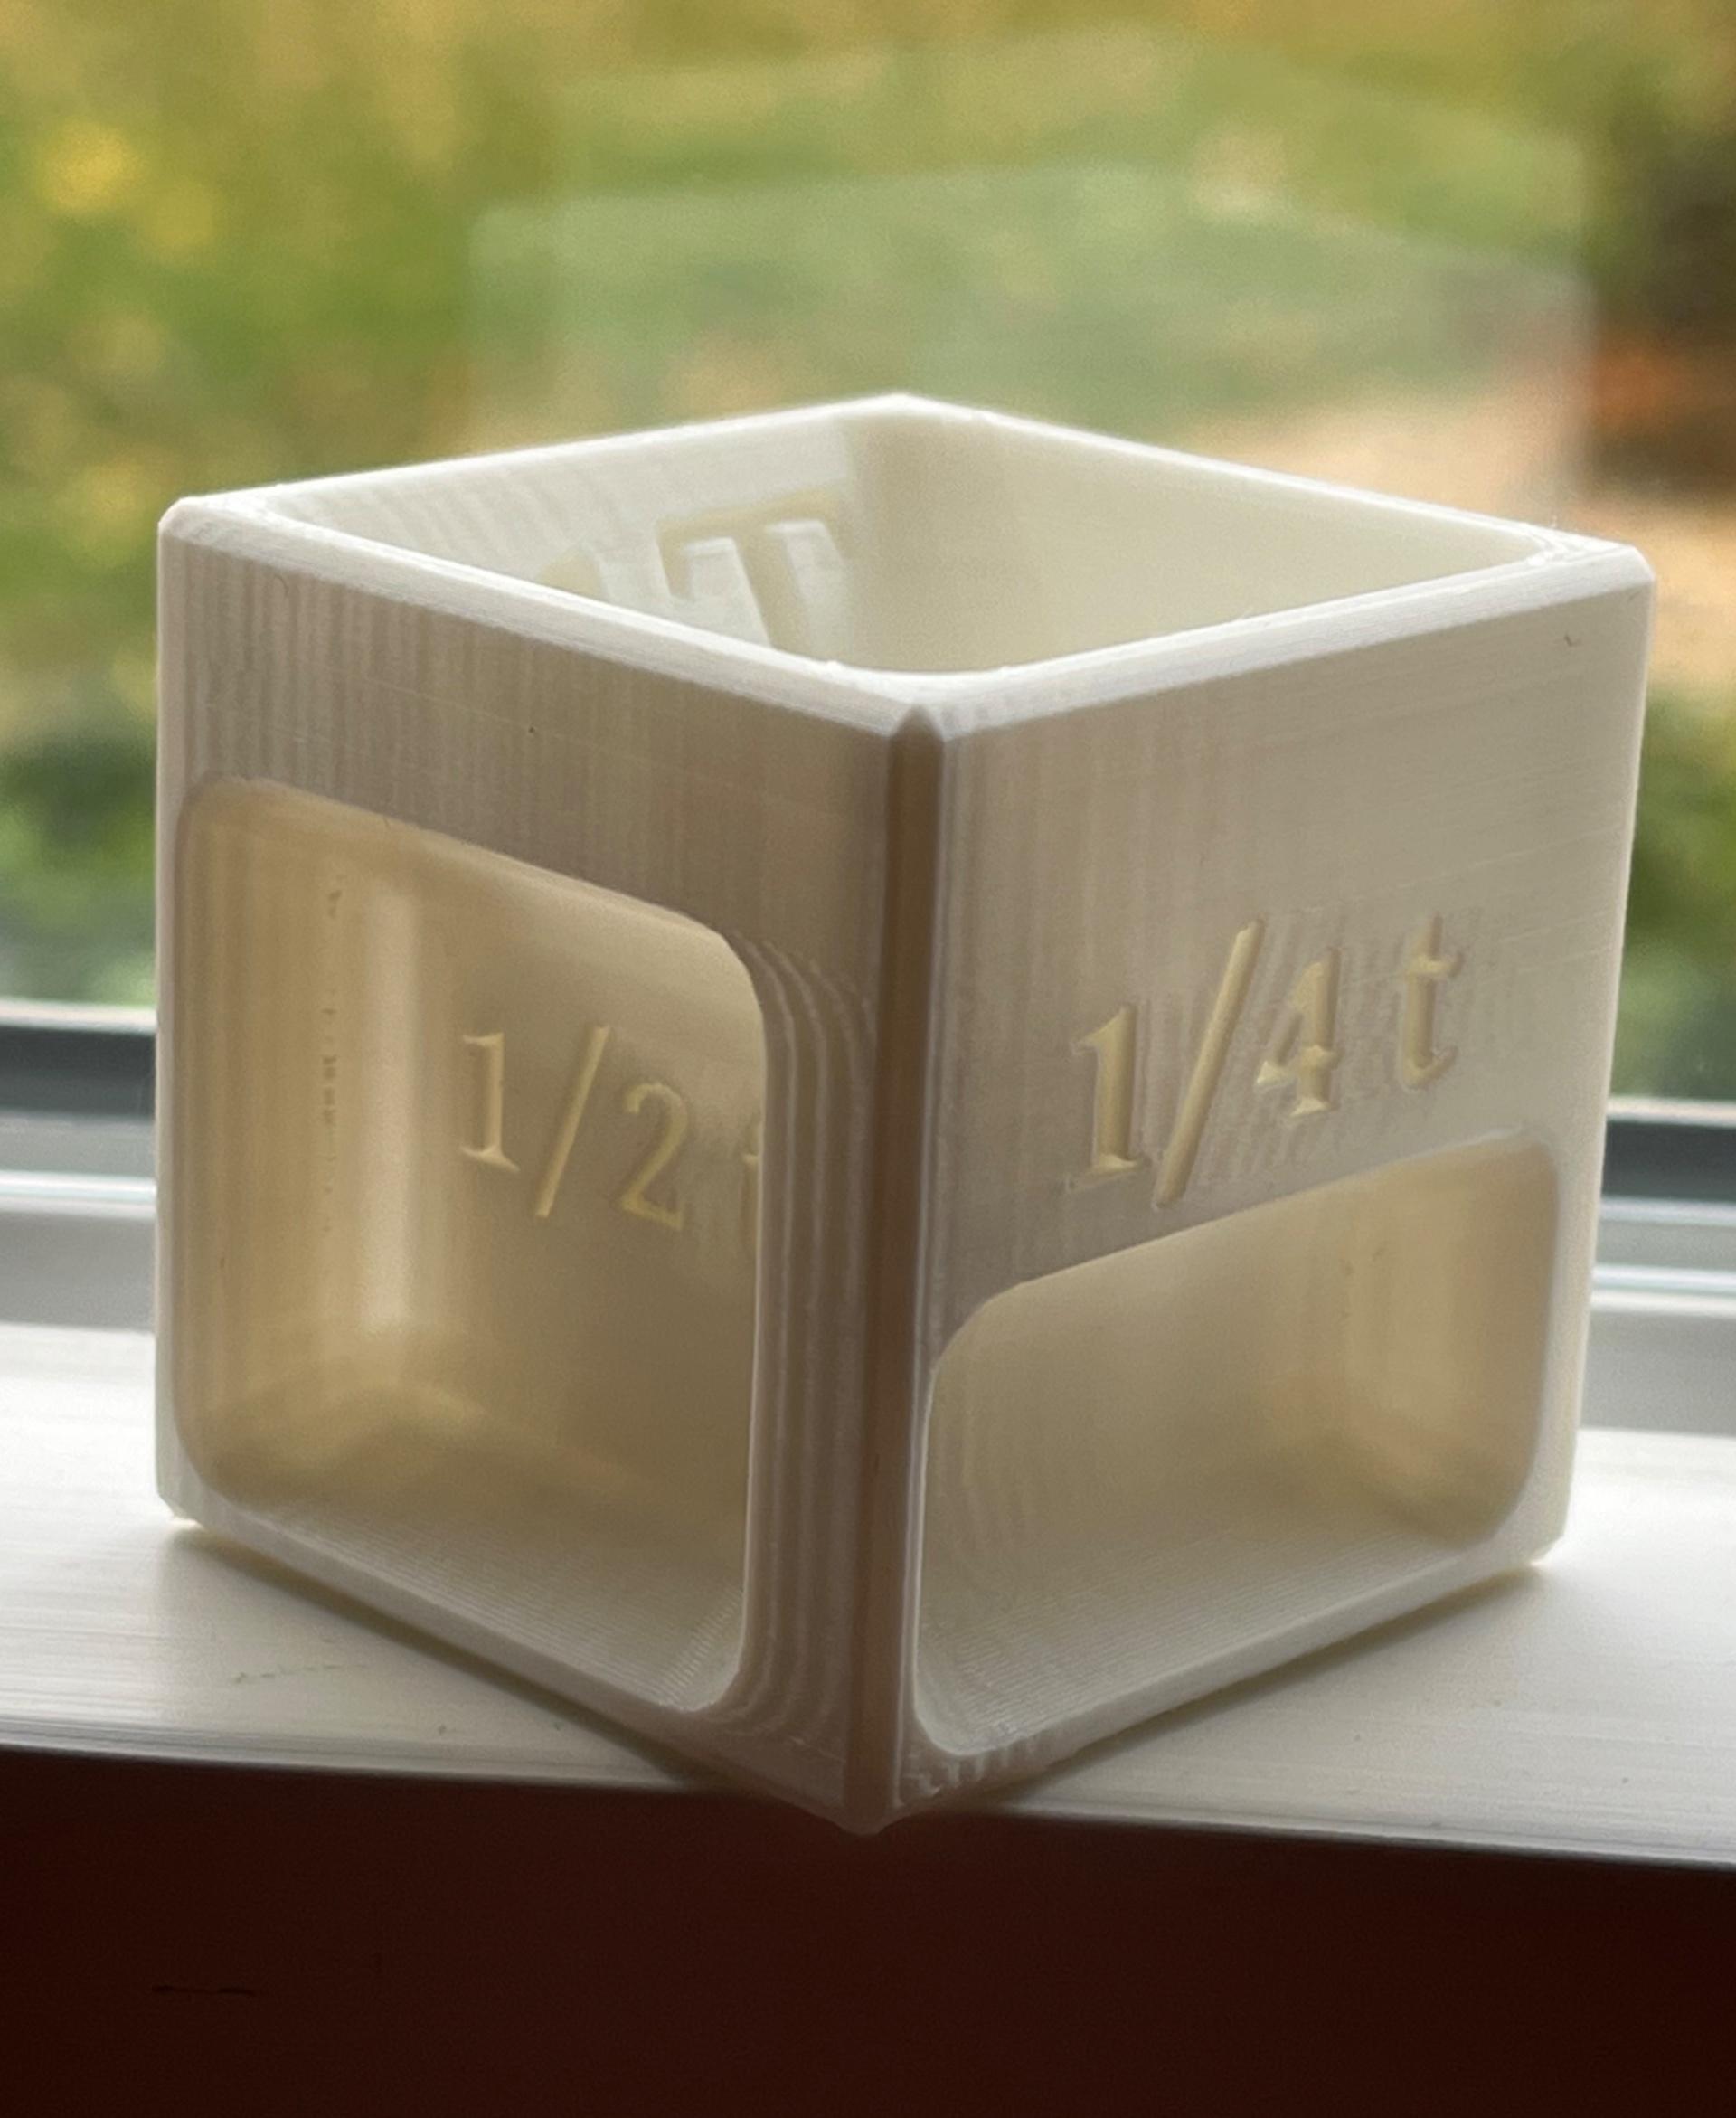 Small Measuring Cube R1.STEP - Added measurement text. - 3d model